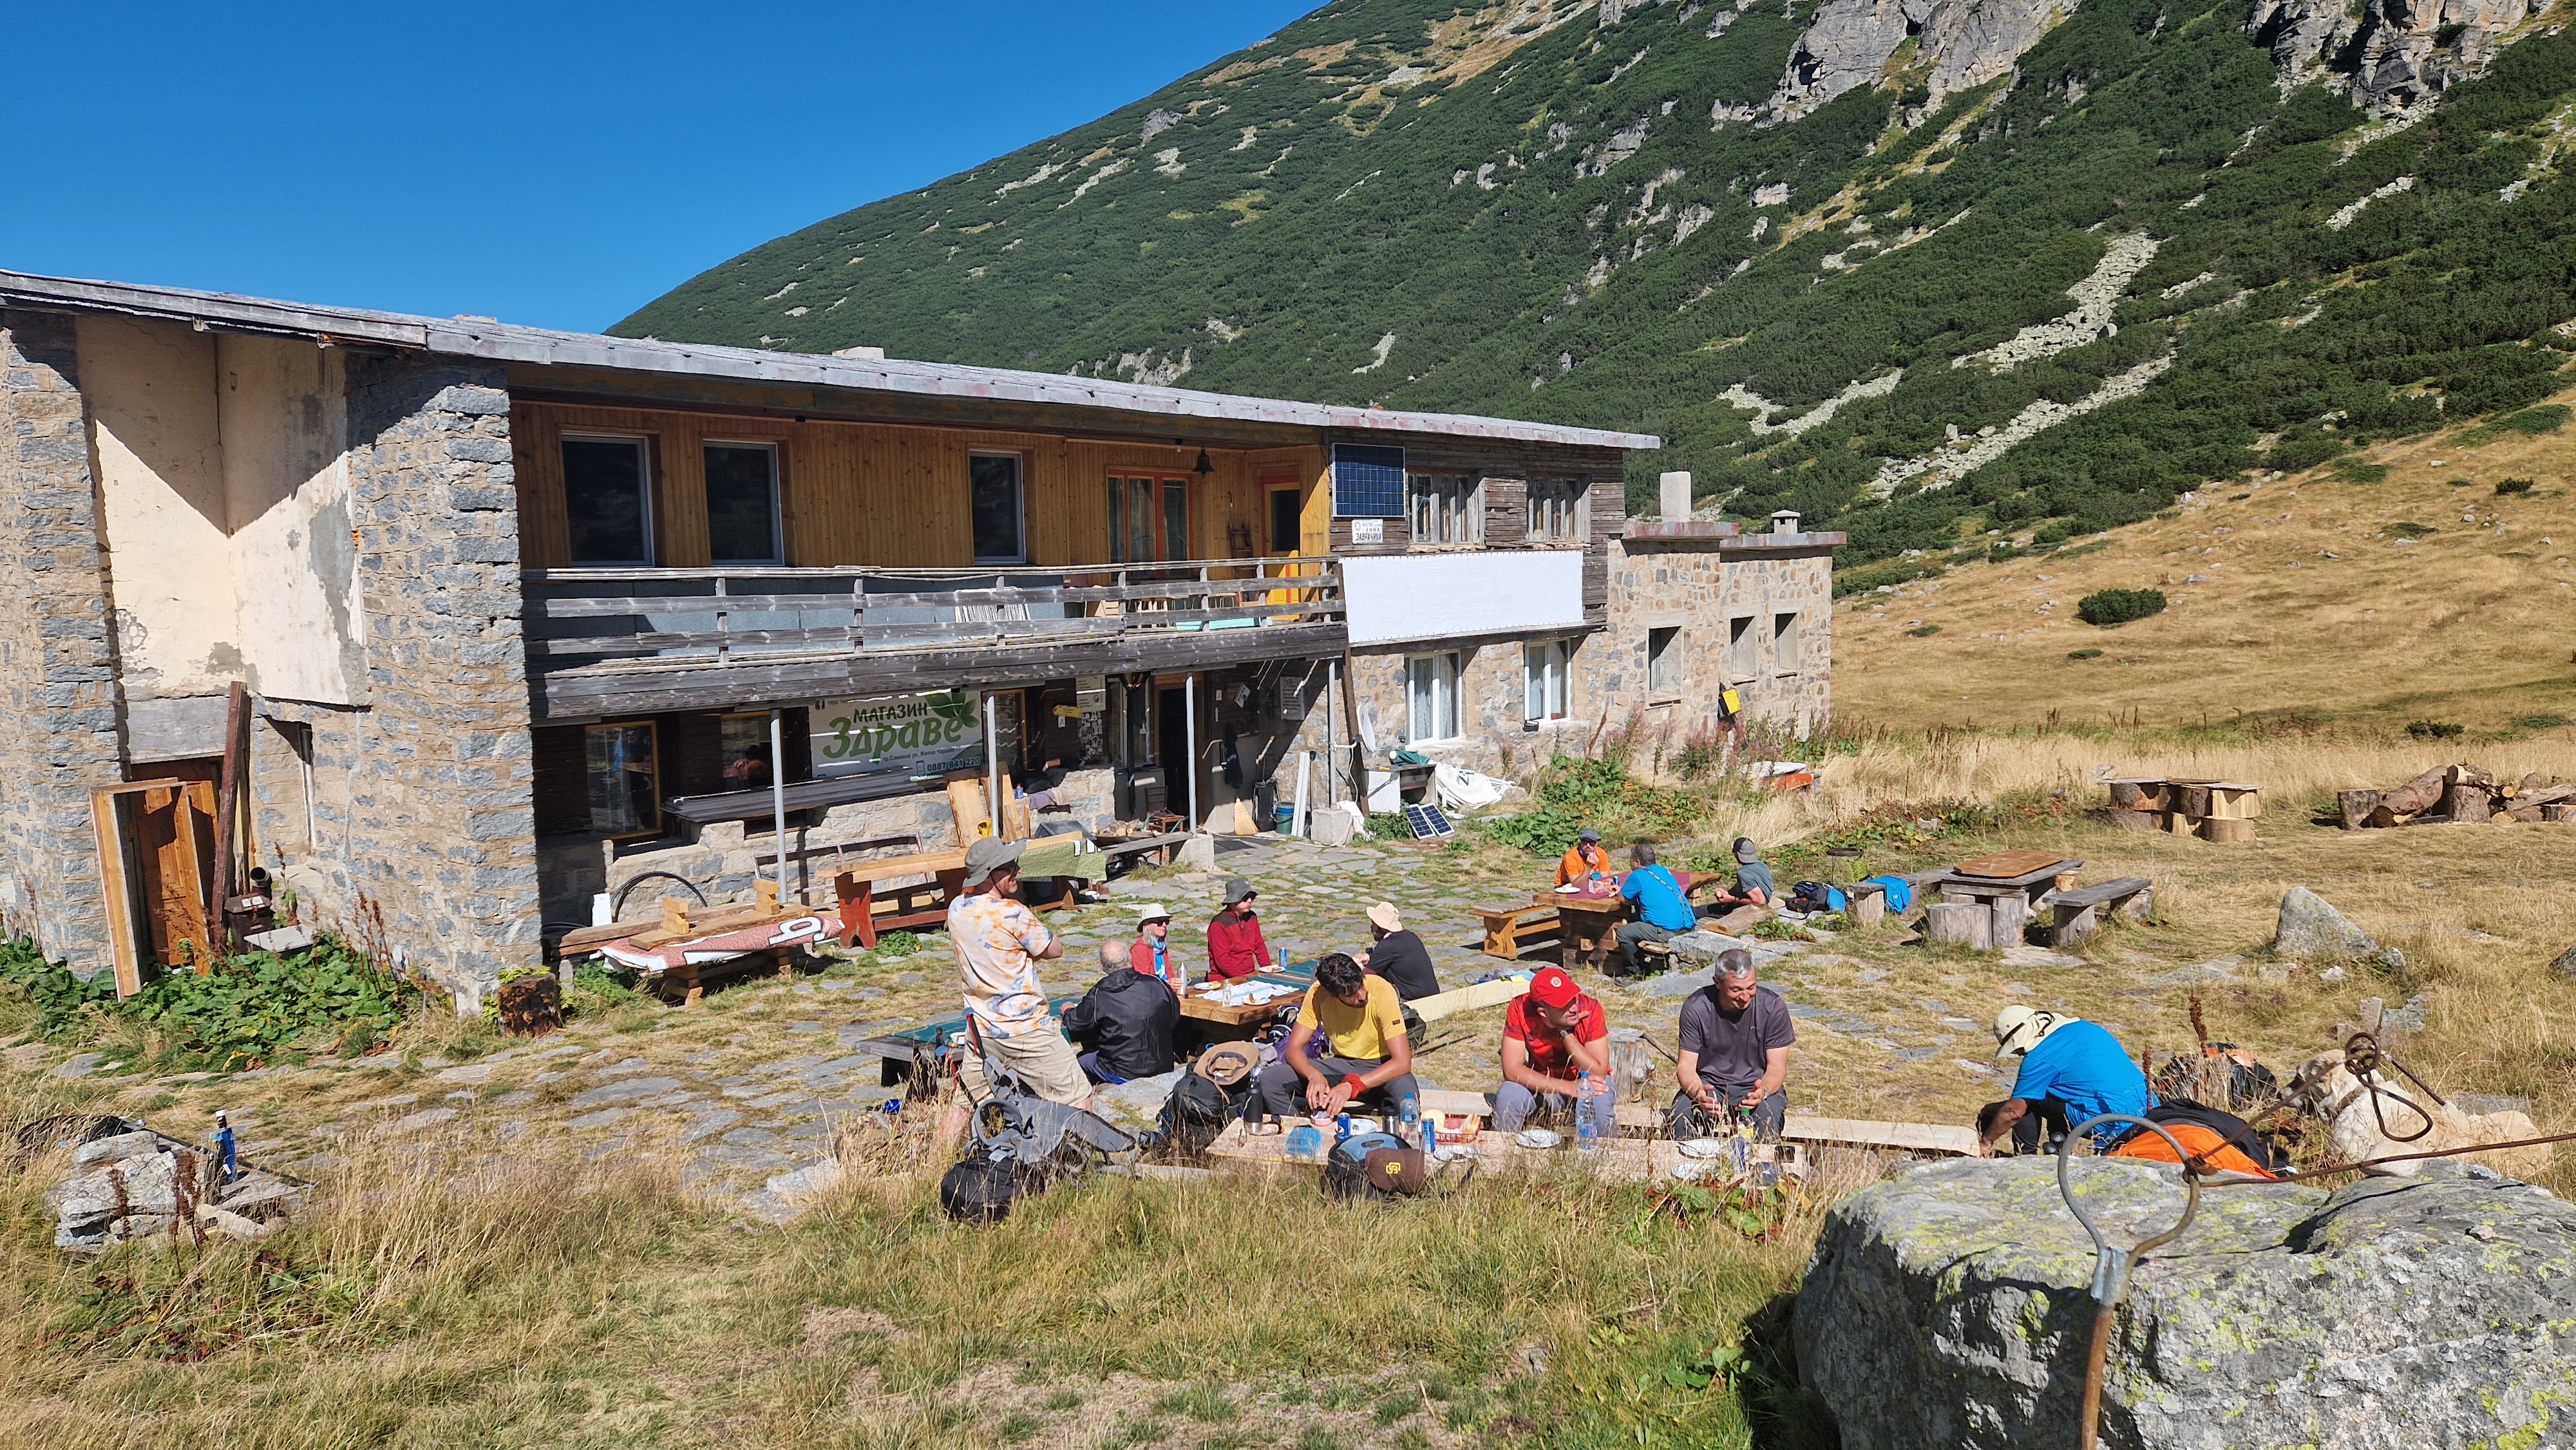 The TEN Trek Musala team gathered by a mountain hut for lunch on their trek in the Rila Mountains